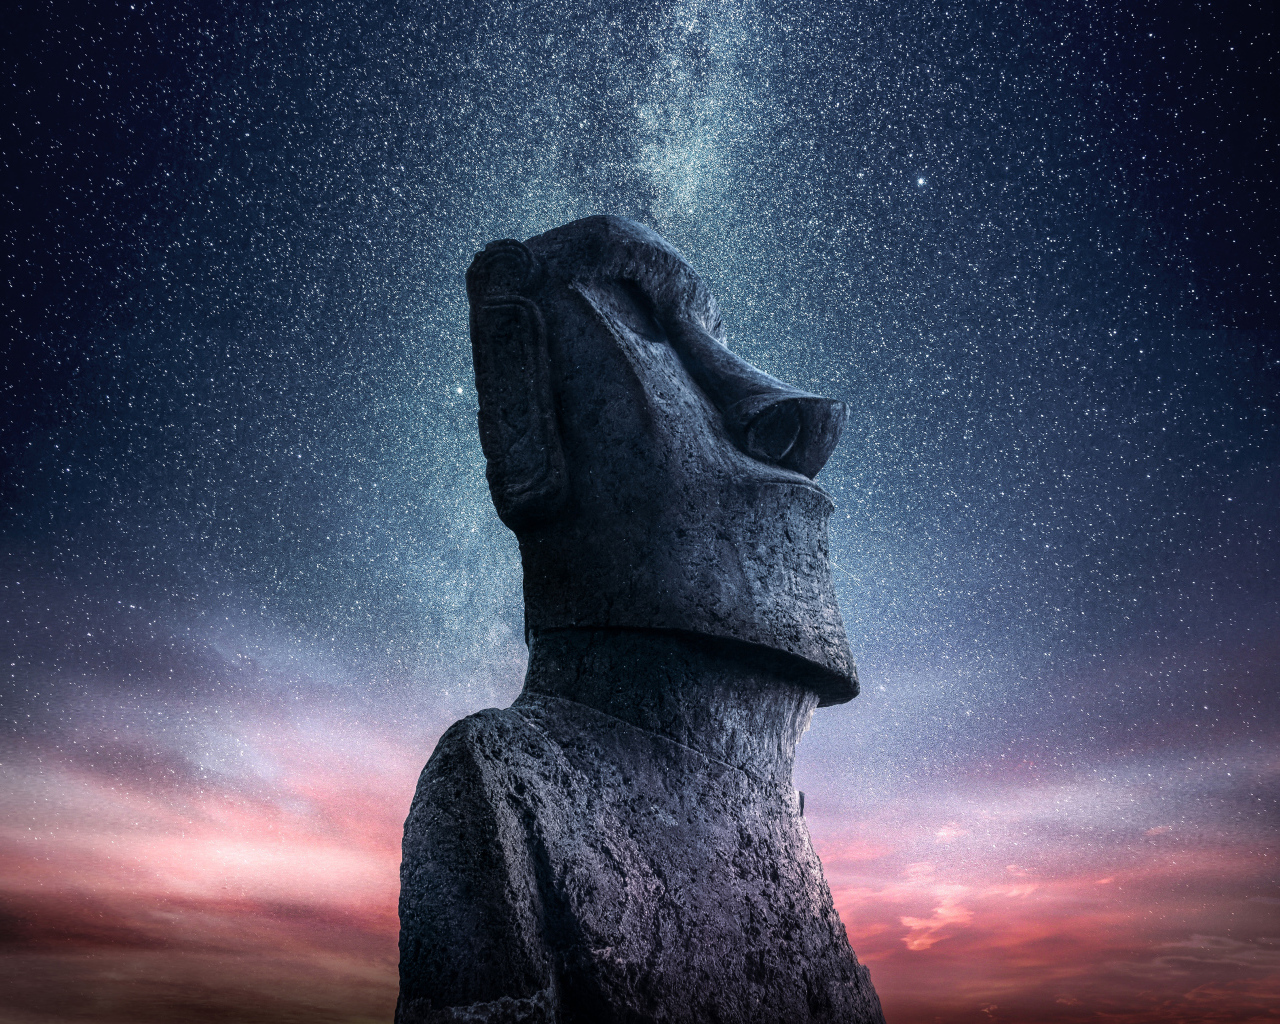 Statue of Moai under the beautiful starry sky, Chile